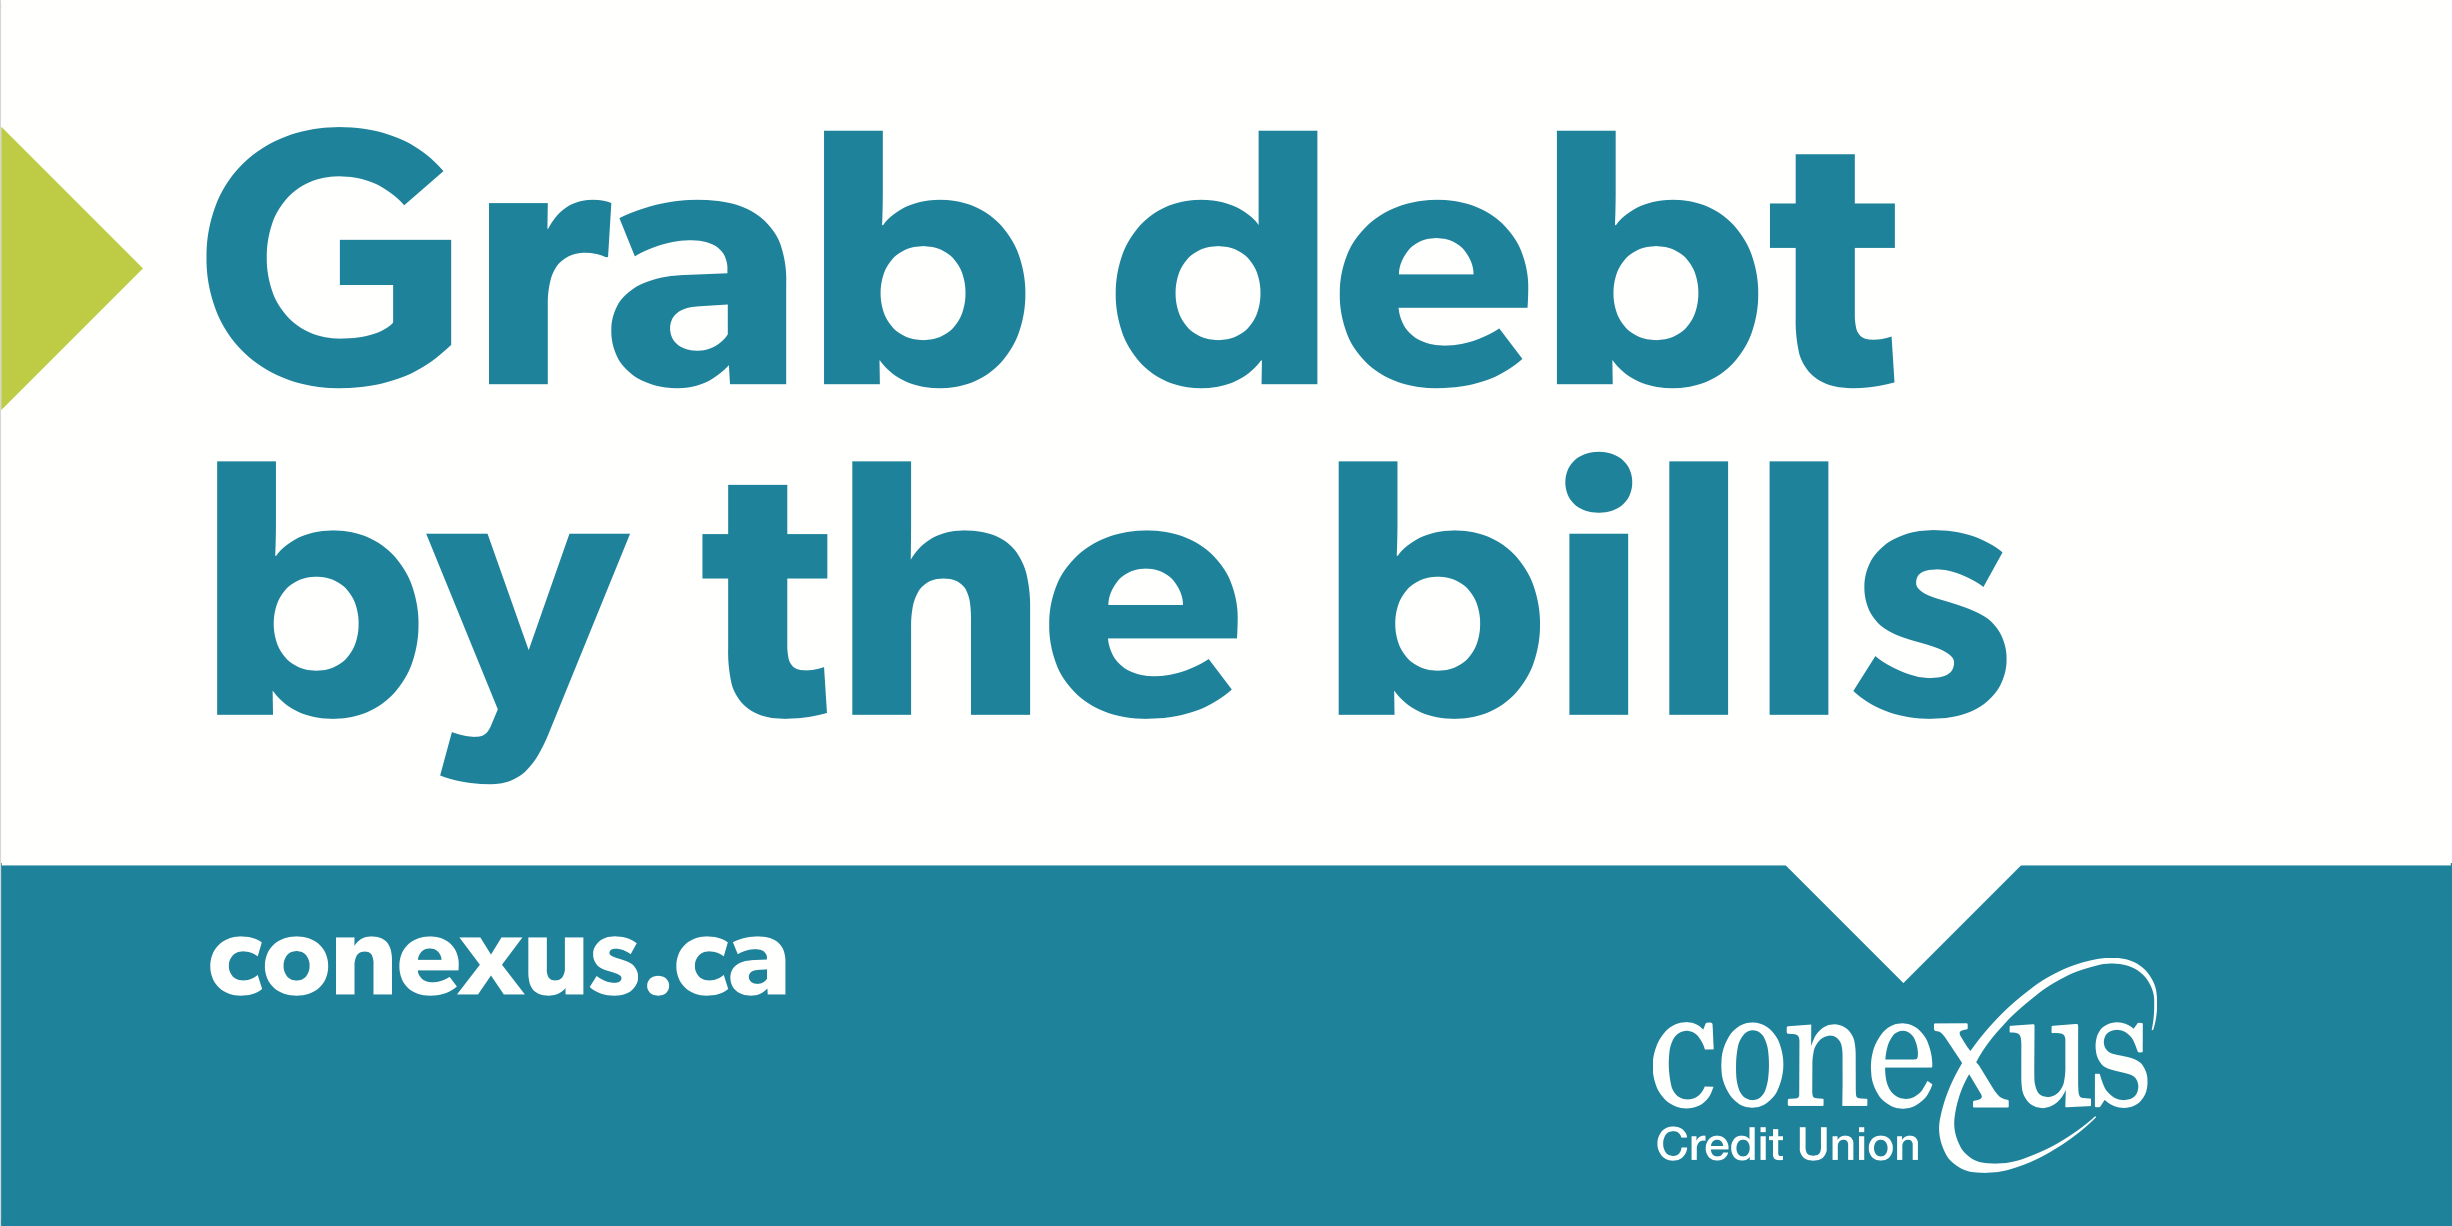 A recent billboard from the Conexus debt campaign